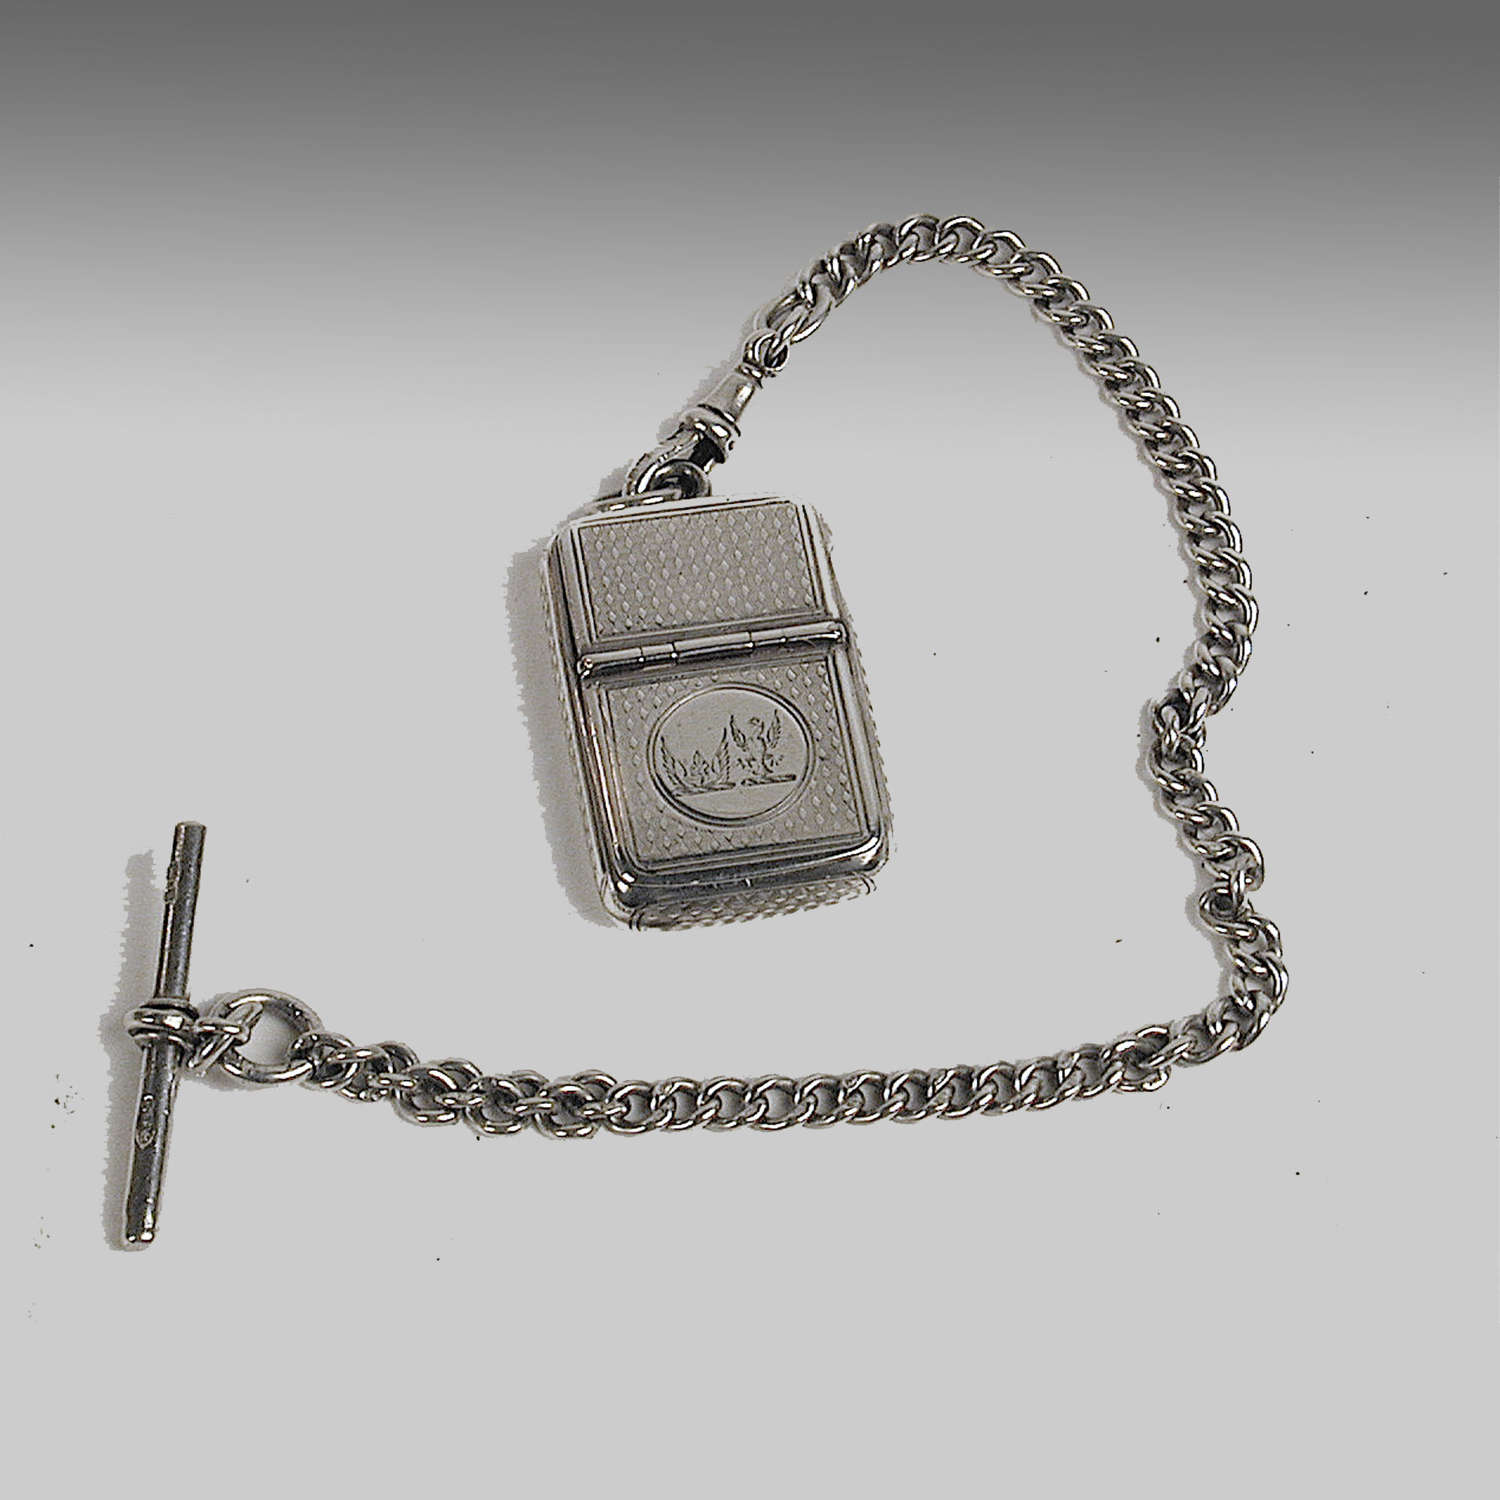 English silver vesta case with cheroot cutter